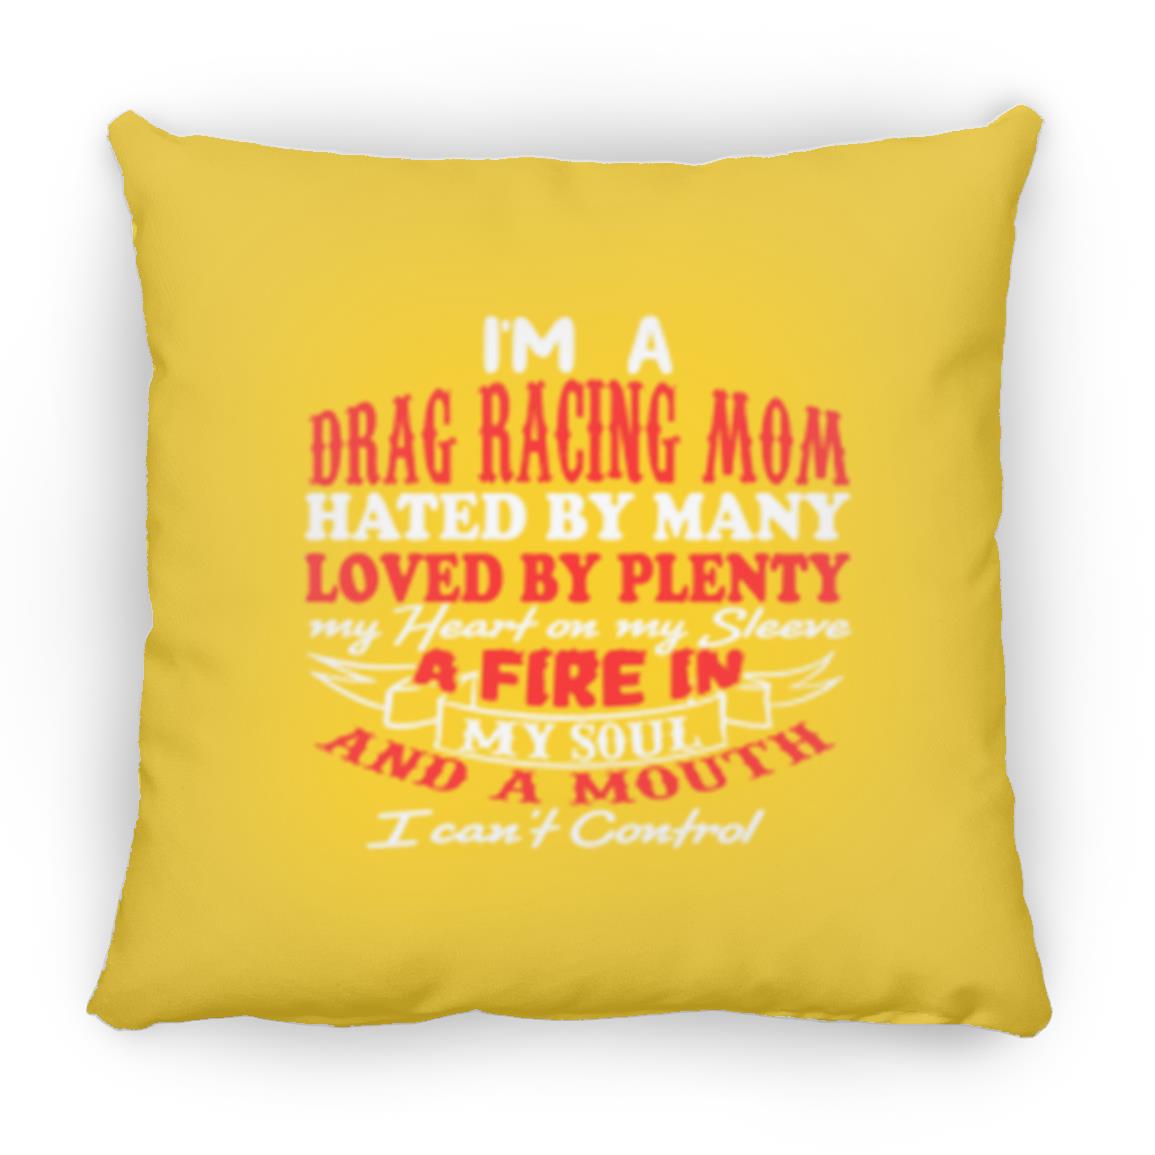 I'm A Drag Racing Mom Hated By Many Loved By Plenty Small Square Pillow